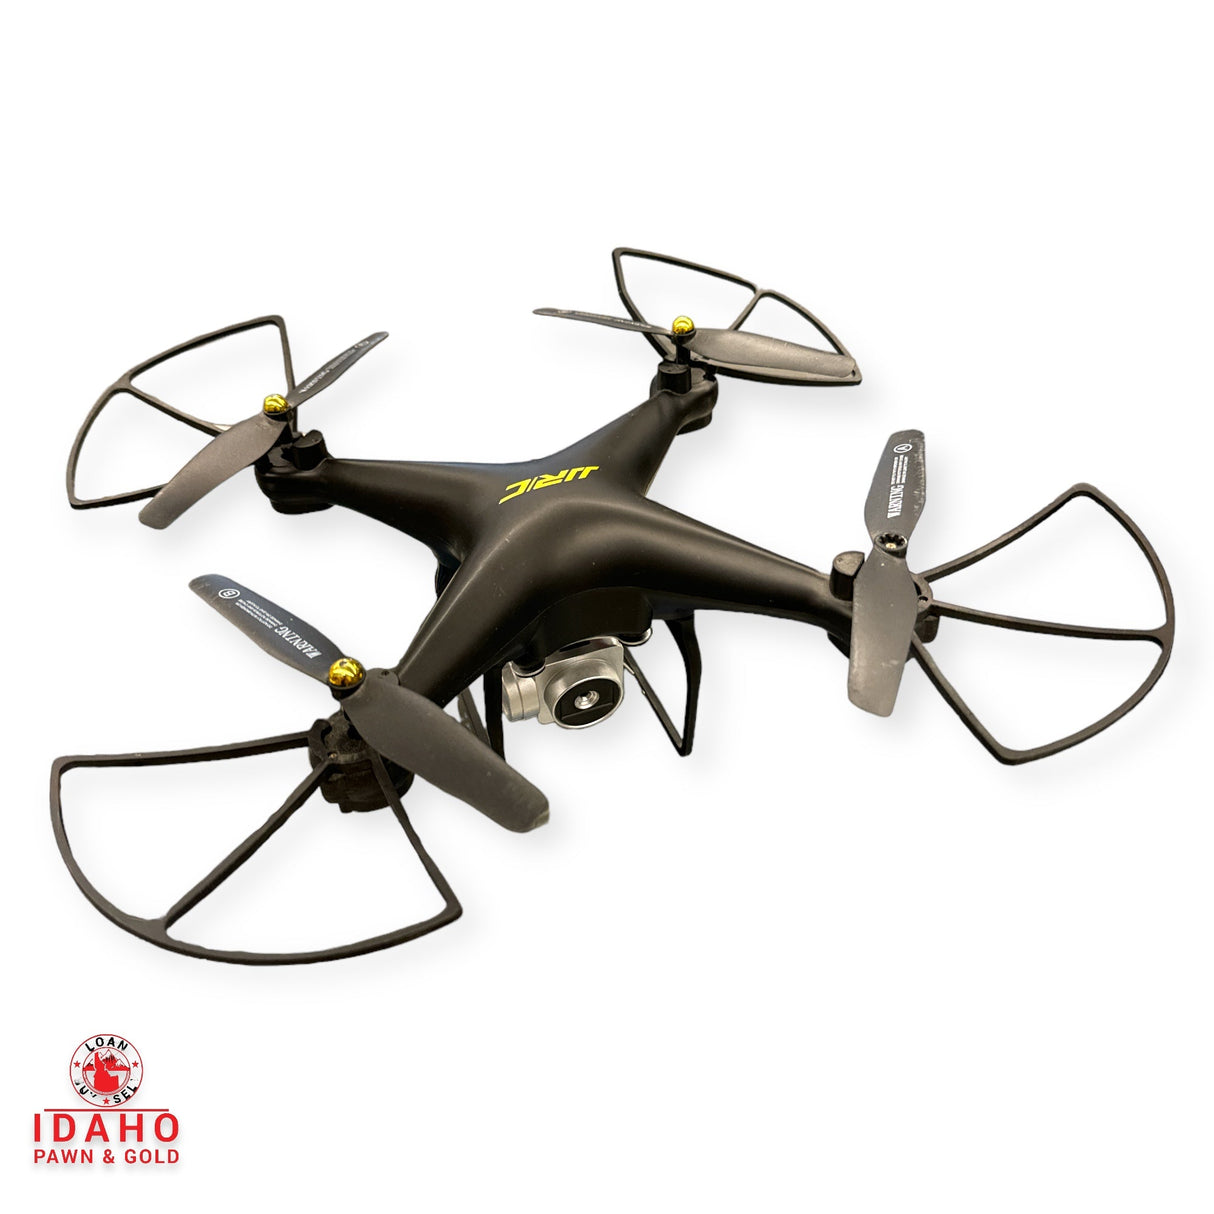 BELLWETHER DRONE - Idaho Pawn & Gold